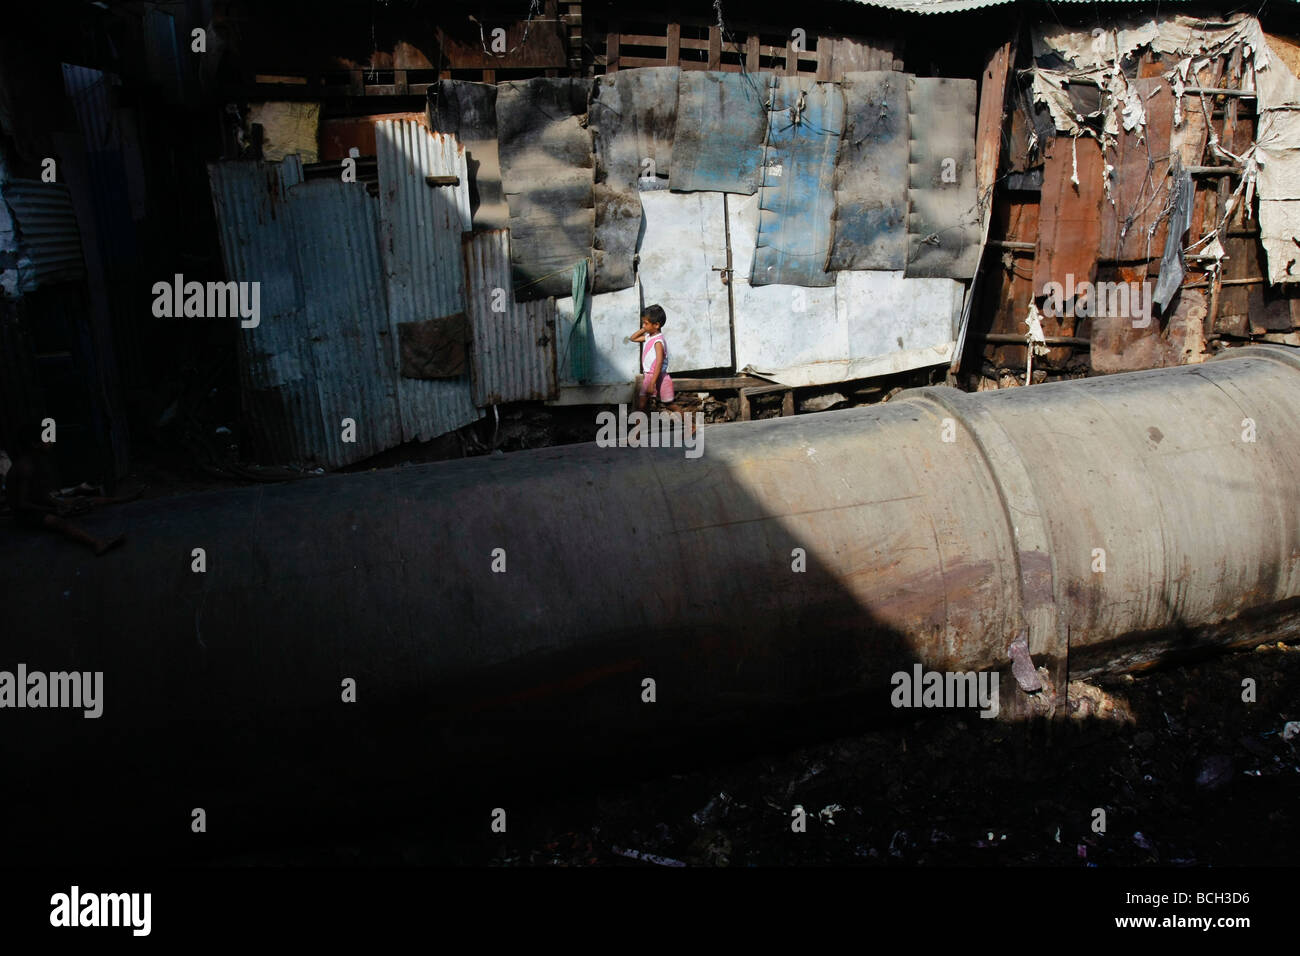 A young girl walks on a large water pipe which is used as a street in the poor slum area of Dharavi in Mumbai (Bombay) in India. Stock Photo